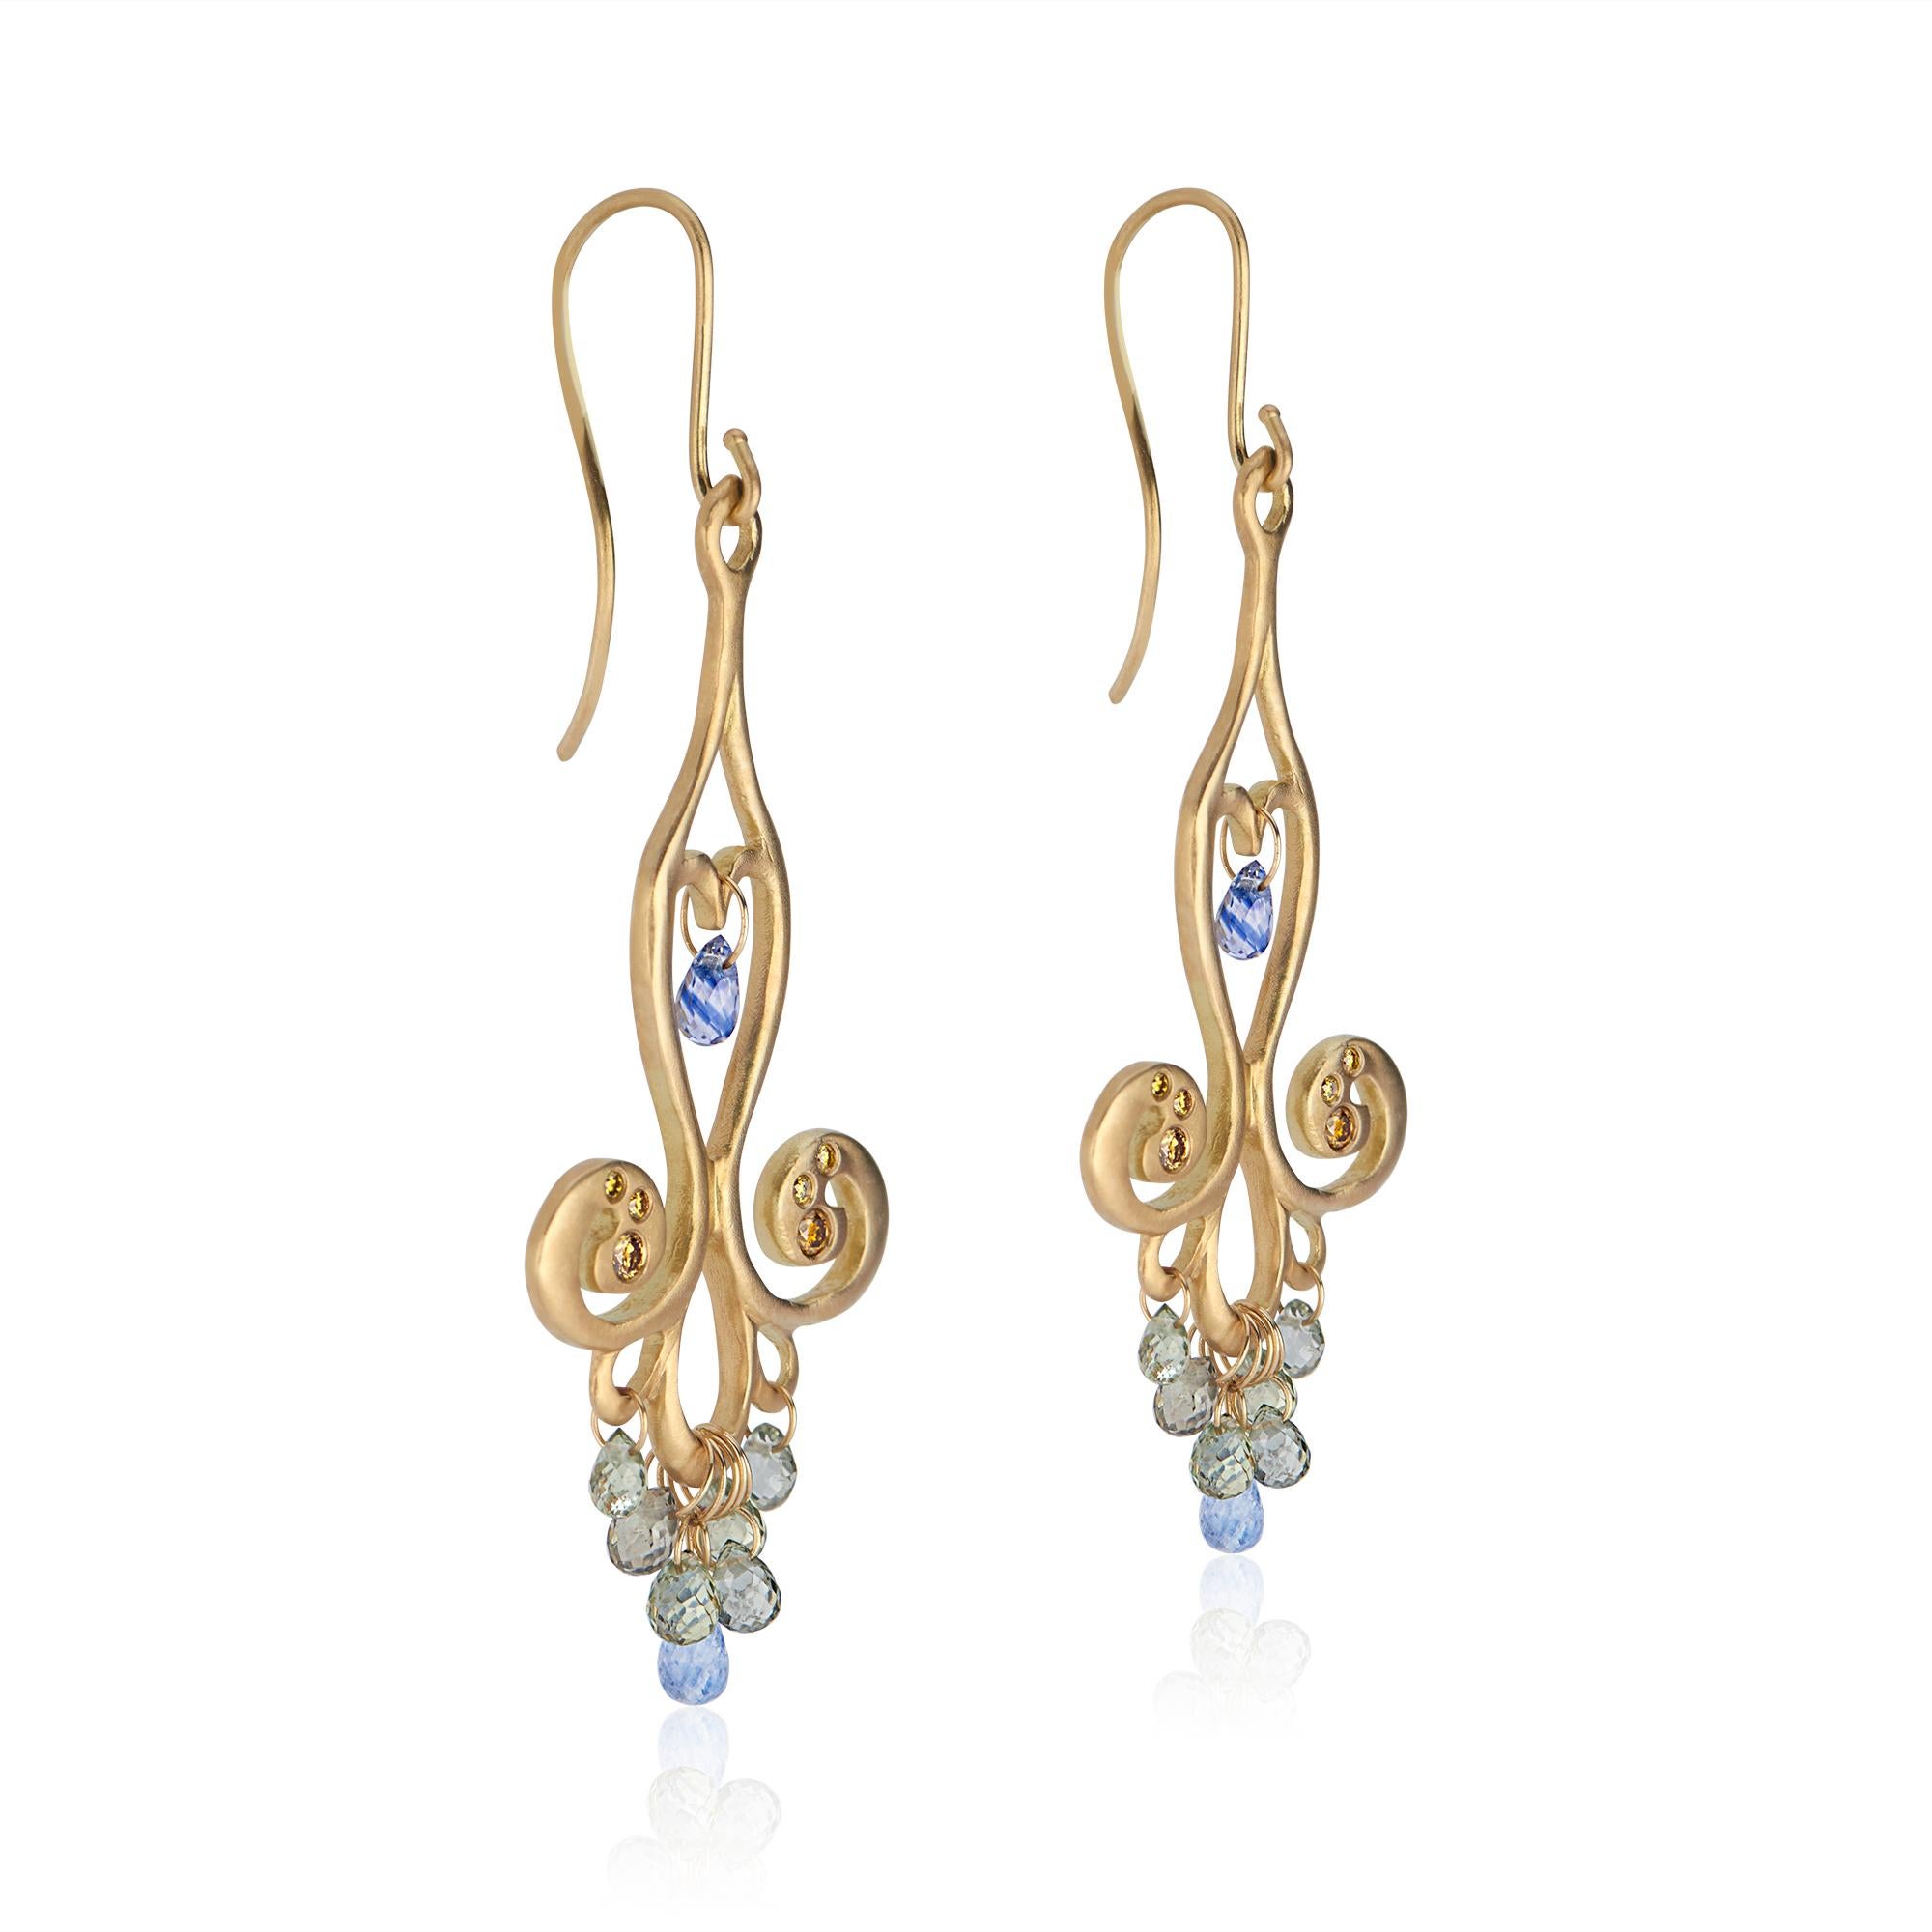 18k yellow gold
Eight blue/green sapphire teardrops (approximately 2 carats per earring)
Six canary diamonds (approximately .113 carats per earring)
18k gold earwire
Matte finish
Chandelier pendants with stones approximately 1.6 inches (4